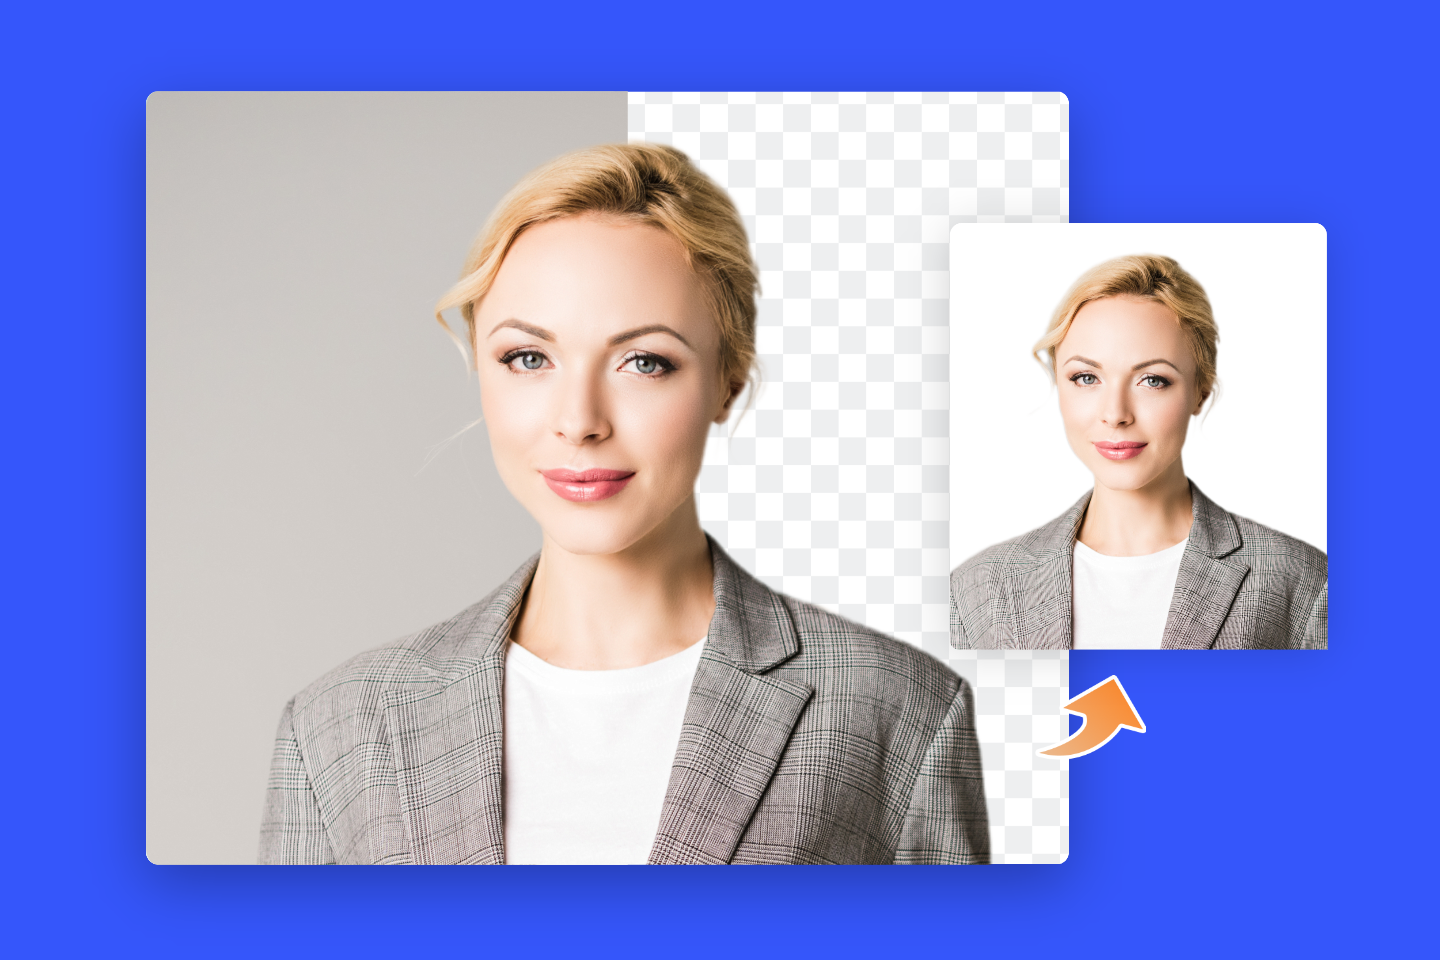 Convert gray background woman image into white background id photo with fotor id photo maker